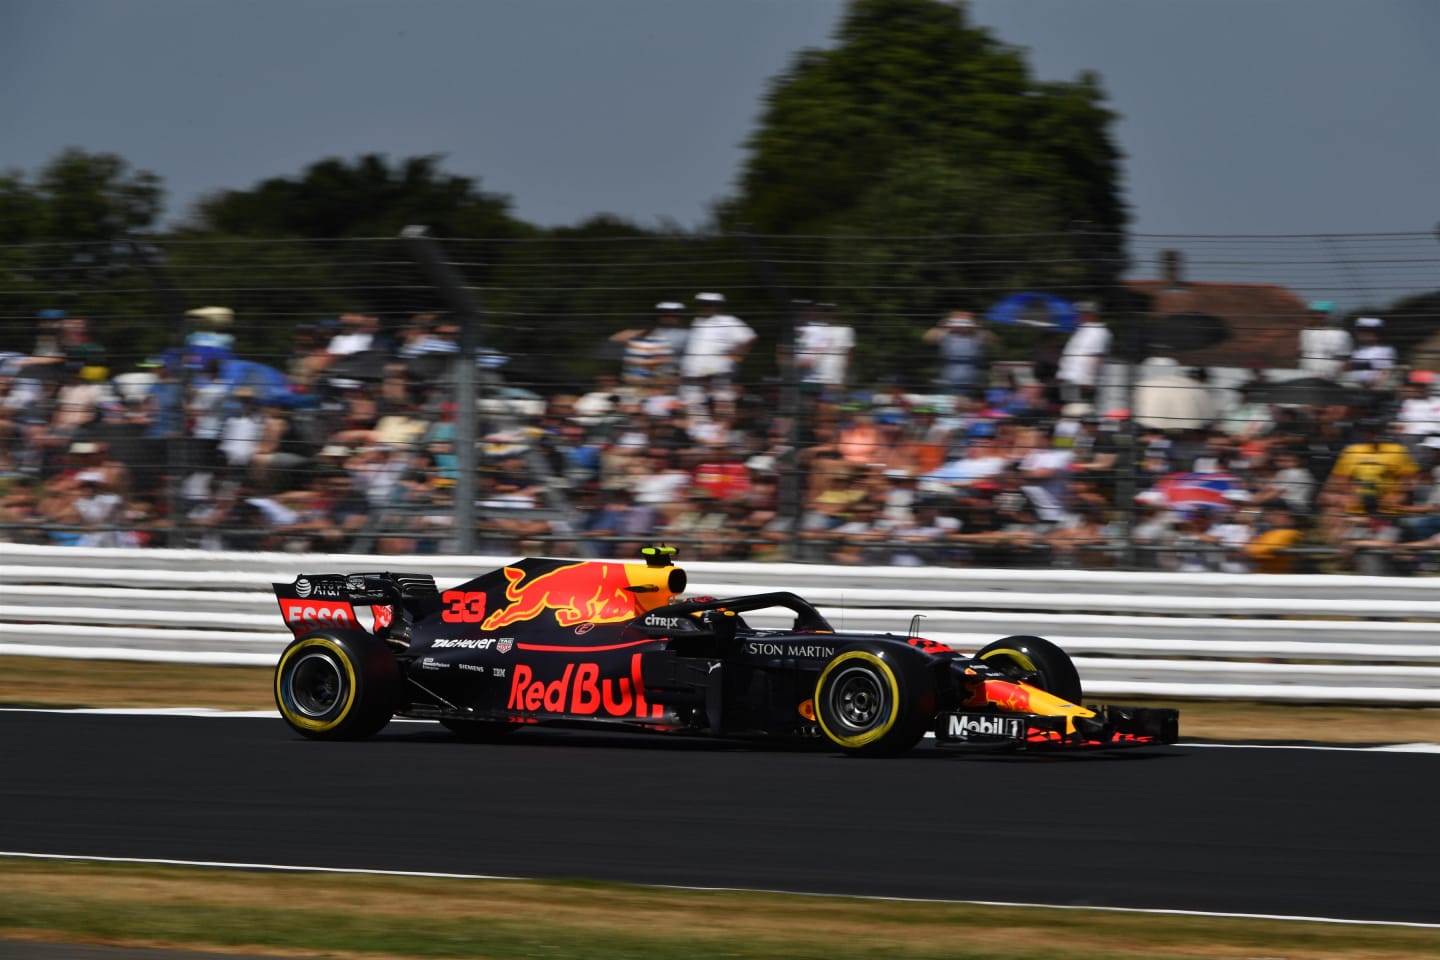 Max Verstappen (NED) Red Bull Racing RB14 at Formula One World Championship, Rd10, British Grand Prix, Qualifying, Silverstone, England, Saturday 7 July 2018. © Mark Sutton/Sutton Images